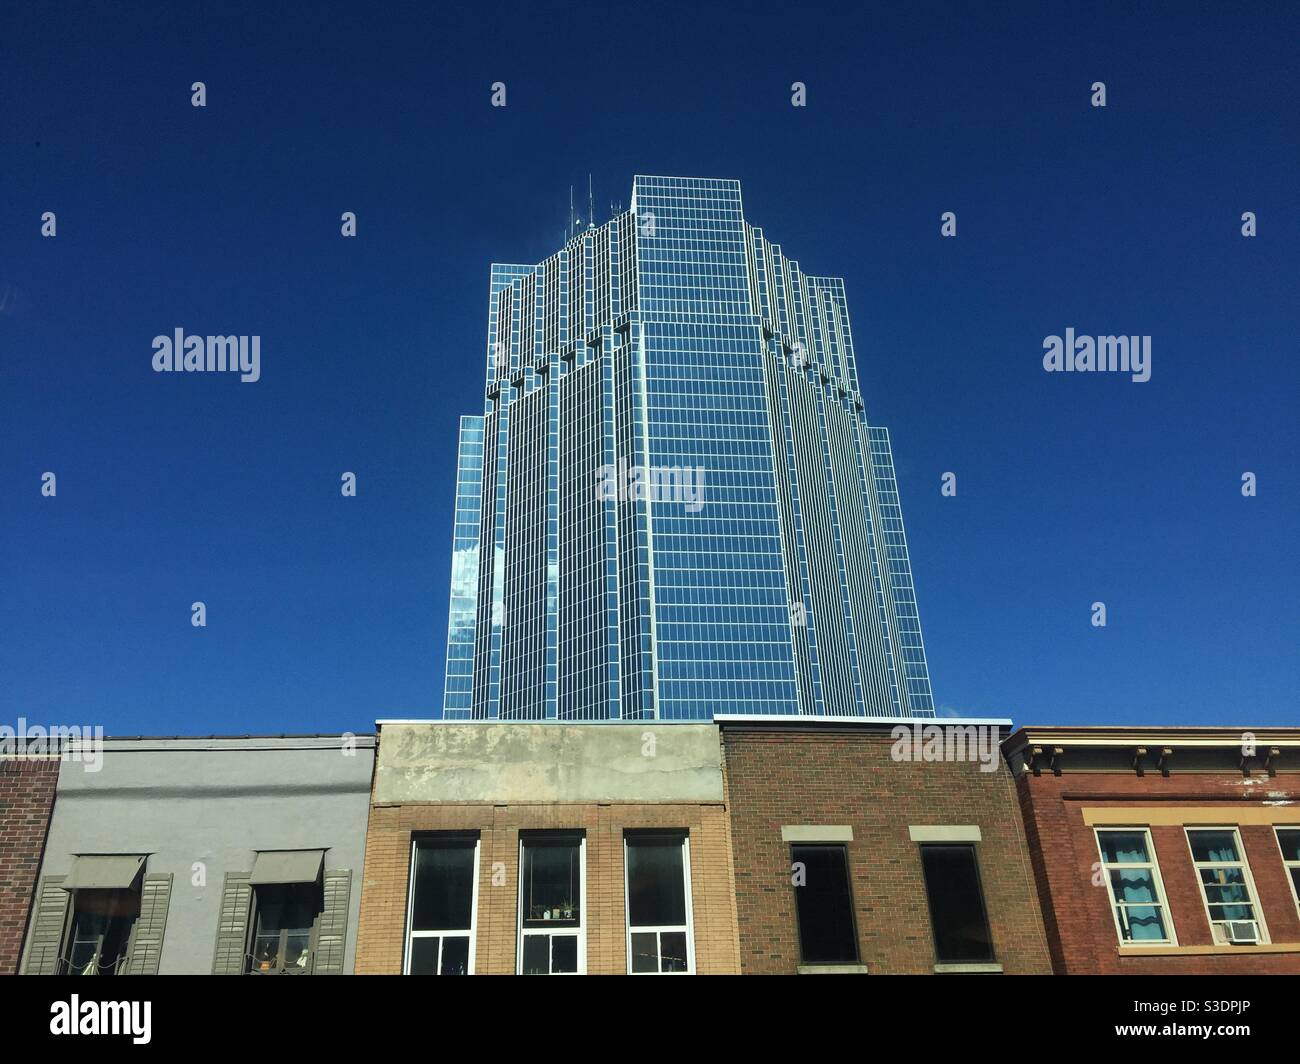 Urban Streetscape, Ontario, Canada. An ultramodern tower rises above a row of traditional, low rise buildings on a blue sky day. Modern times. Stock Photo